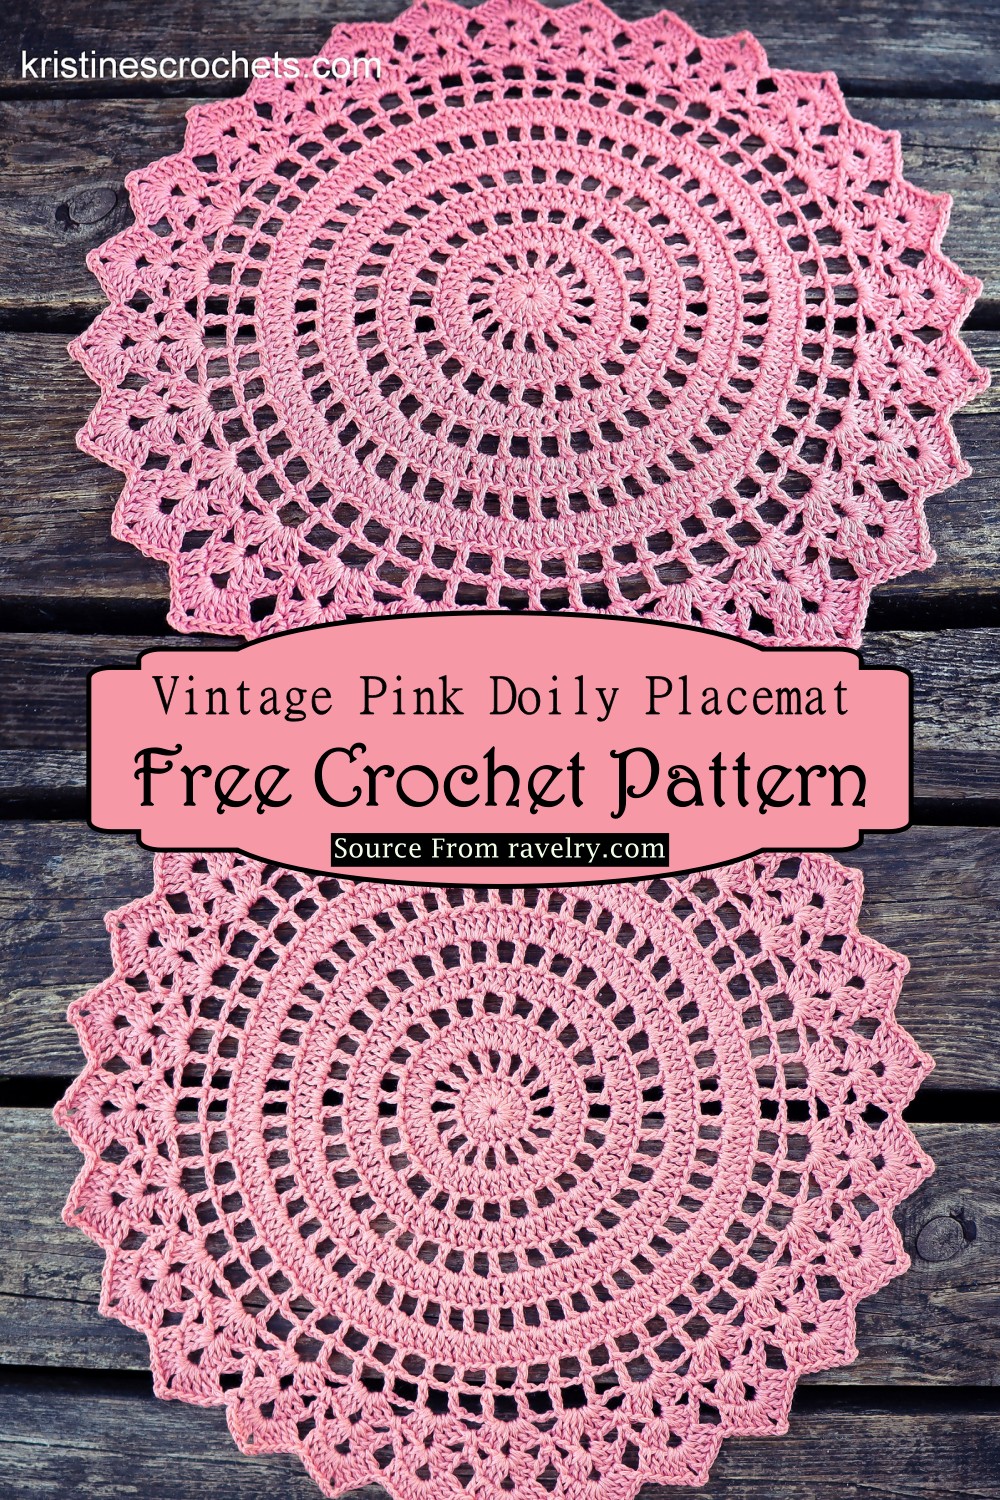 Vintage Pink Doily Placemat